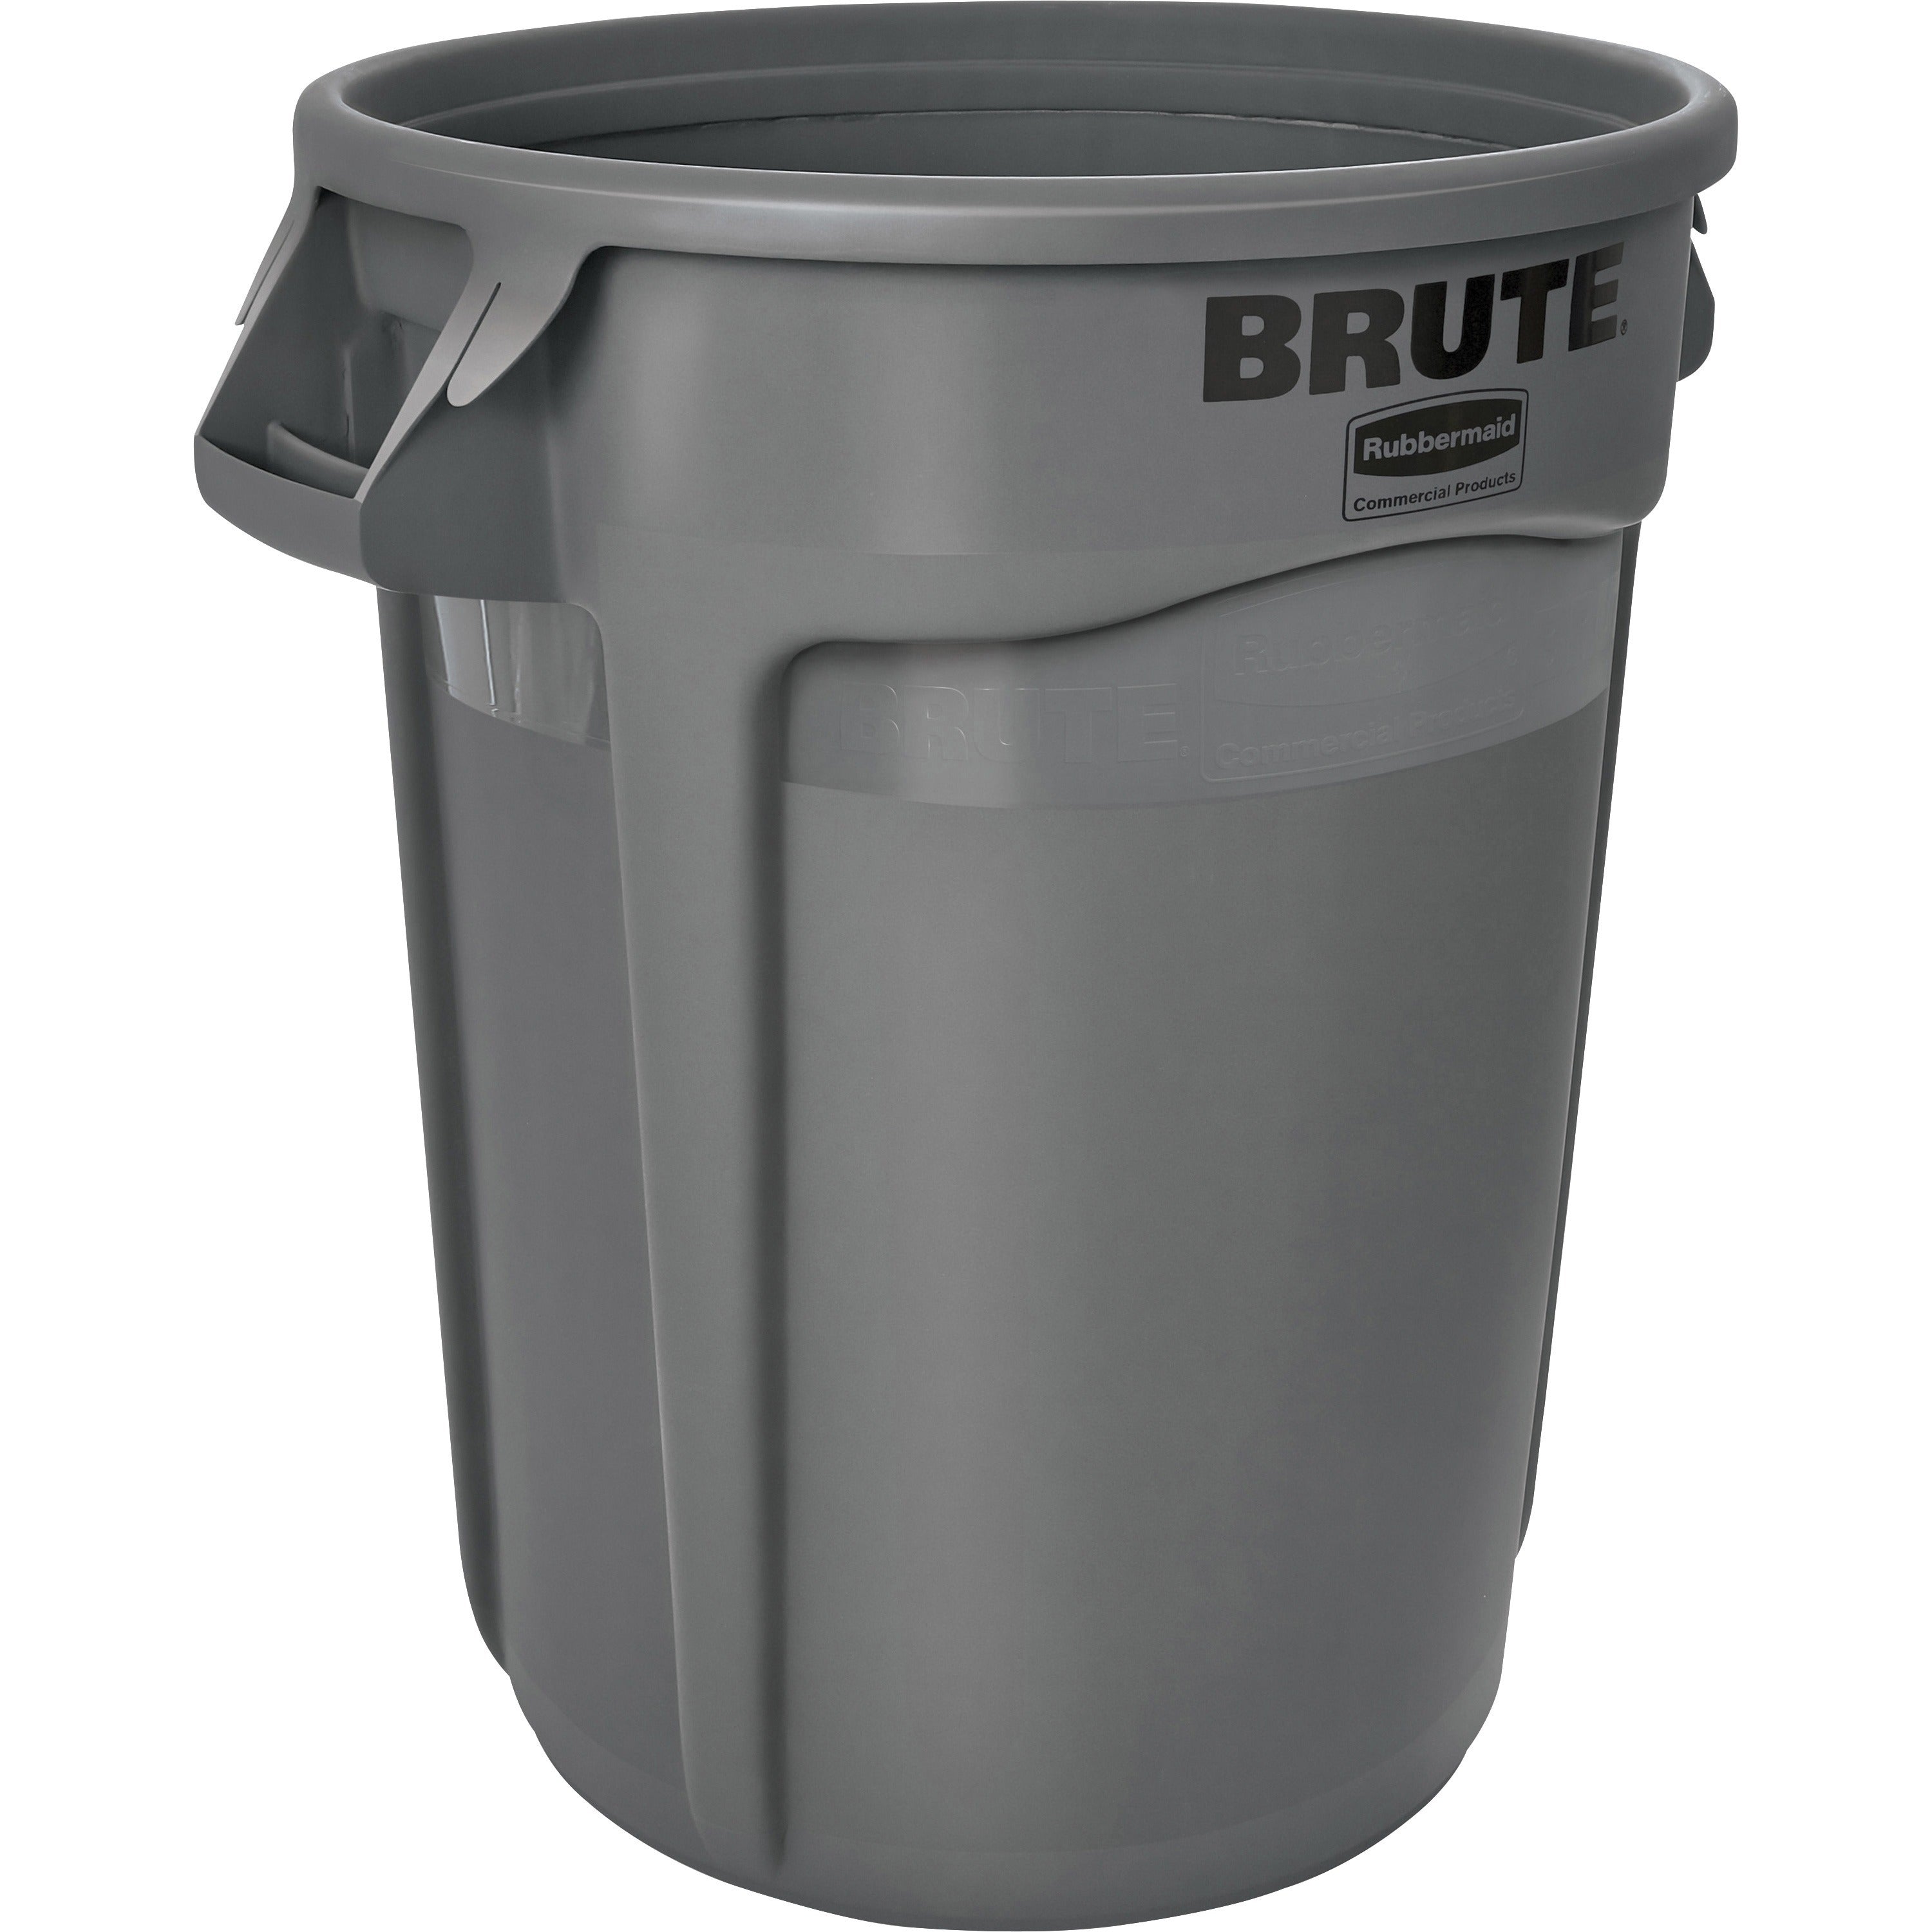 rubbermaid-commercial-brute-32-gallon-vented-containers_rcp263200gyct - 1